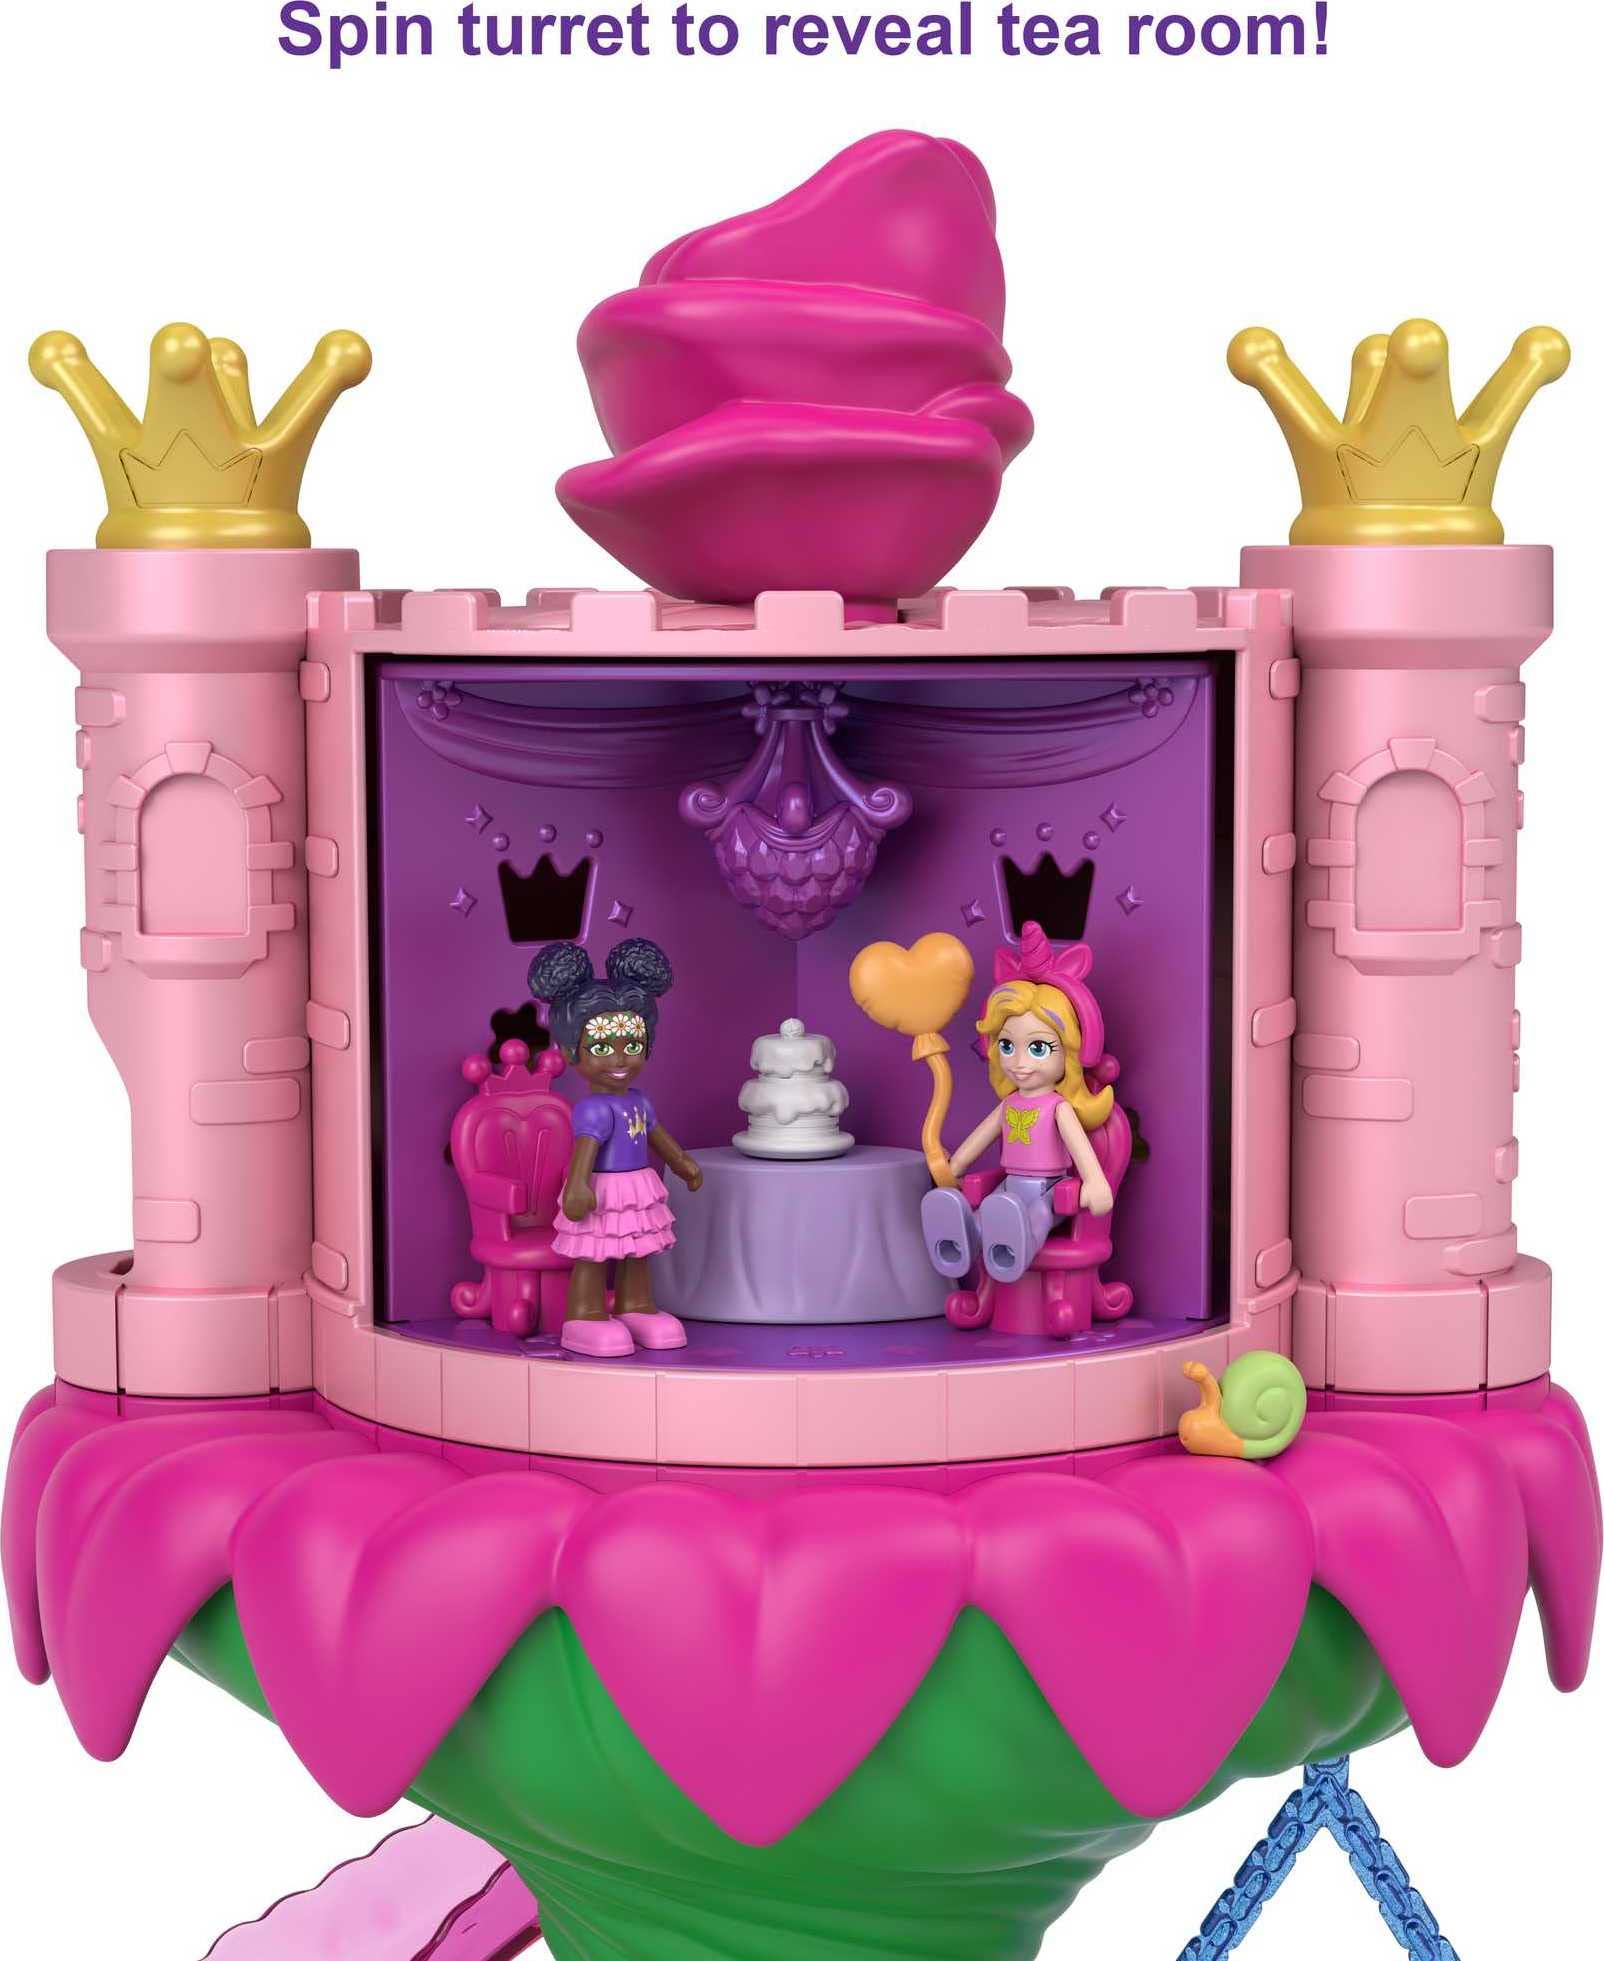 Polly Pocket Rainbow Funland Fairy Flight Ride Playset, Polly & Friend Dolls, 15 Accessories, Dispenser Feature for Surprises, Great Gift for Ages 4 & Up